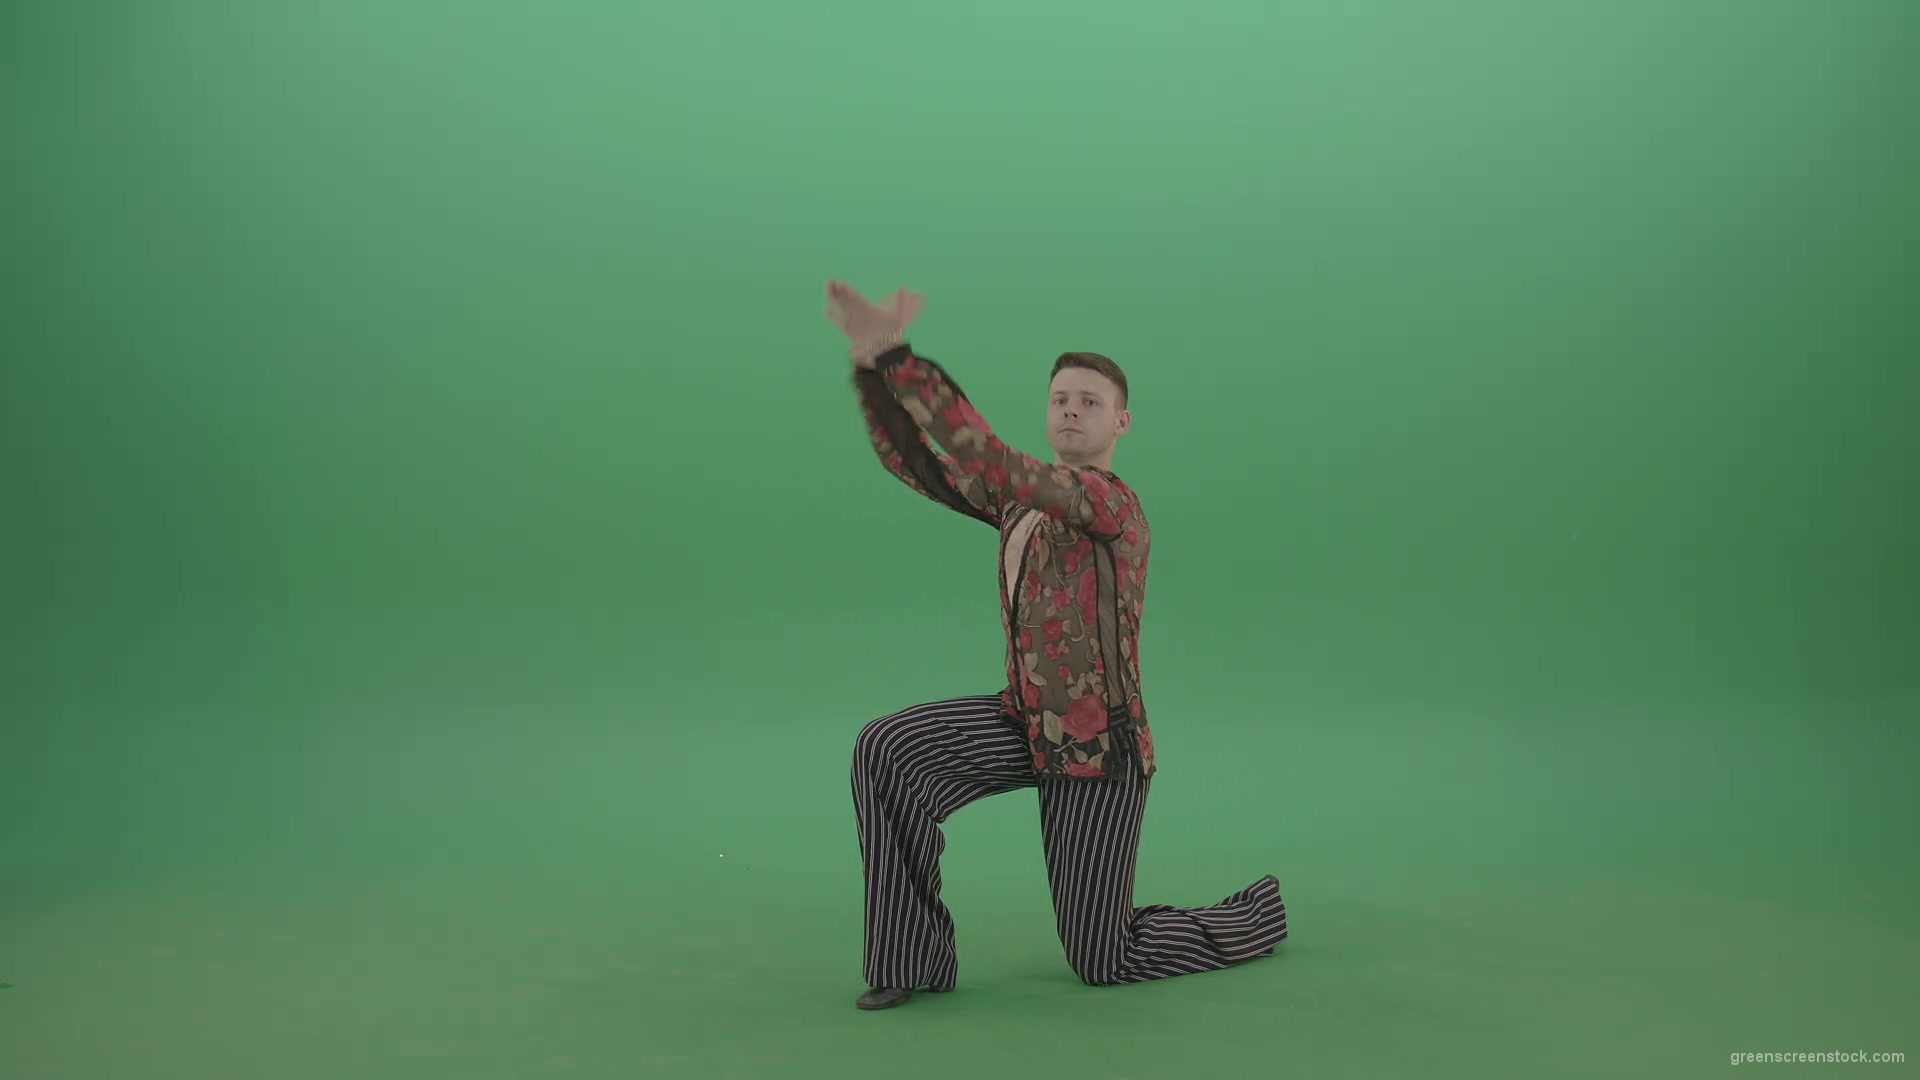 Rumba-Man-get-down-on-one-knees-and-clapping-in-hands-over-green-screen-4K-Video-Footage--1920_002 Green Screen Stock